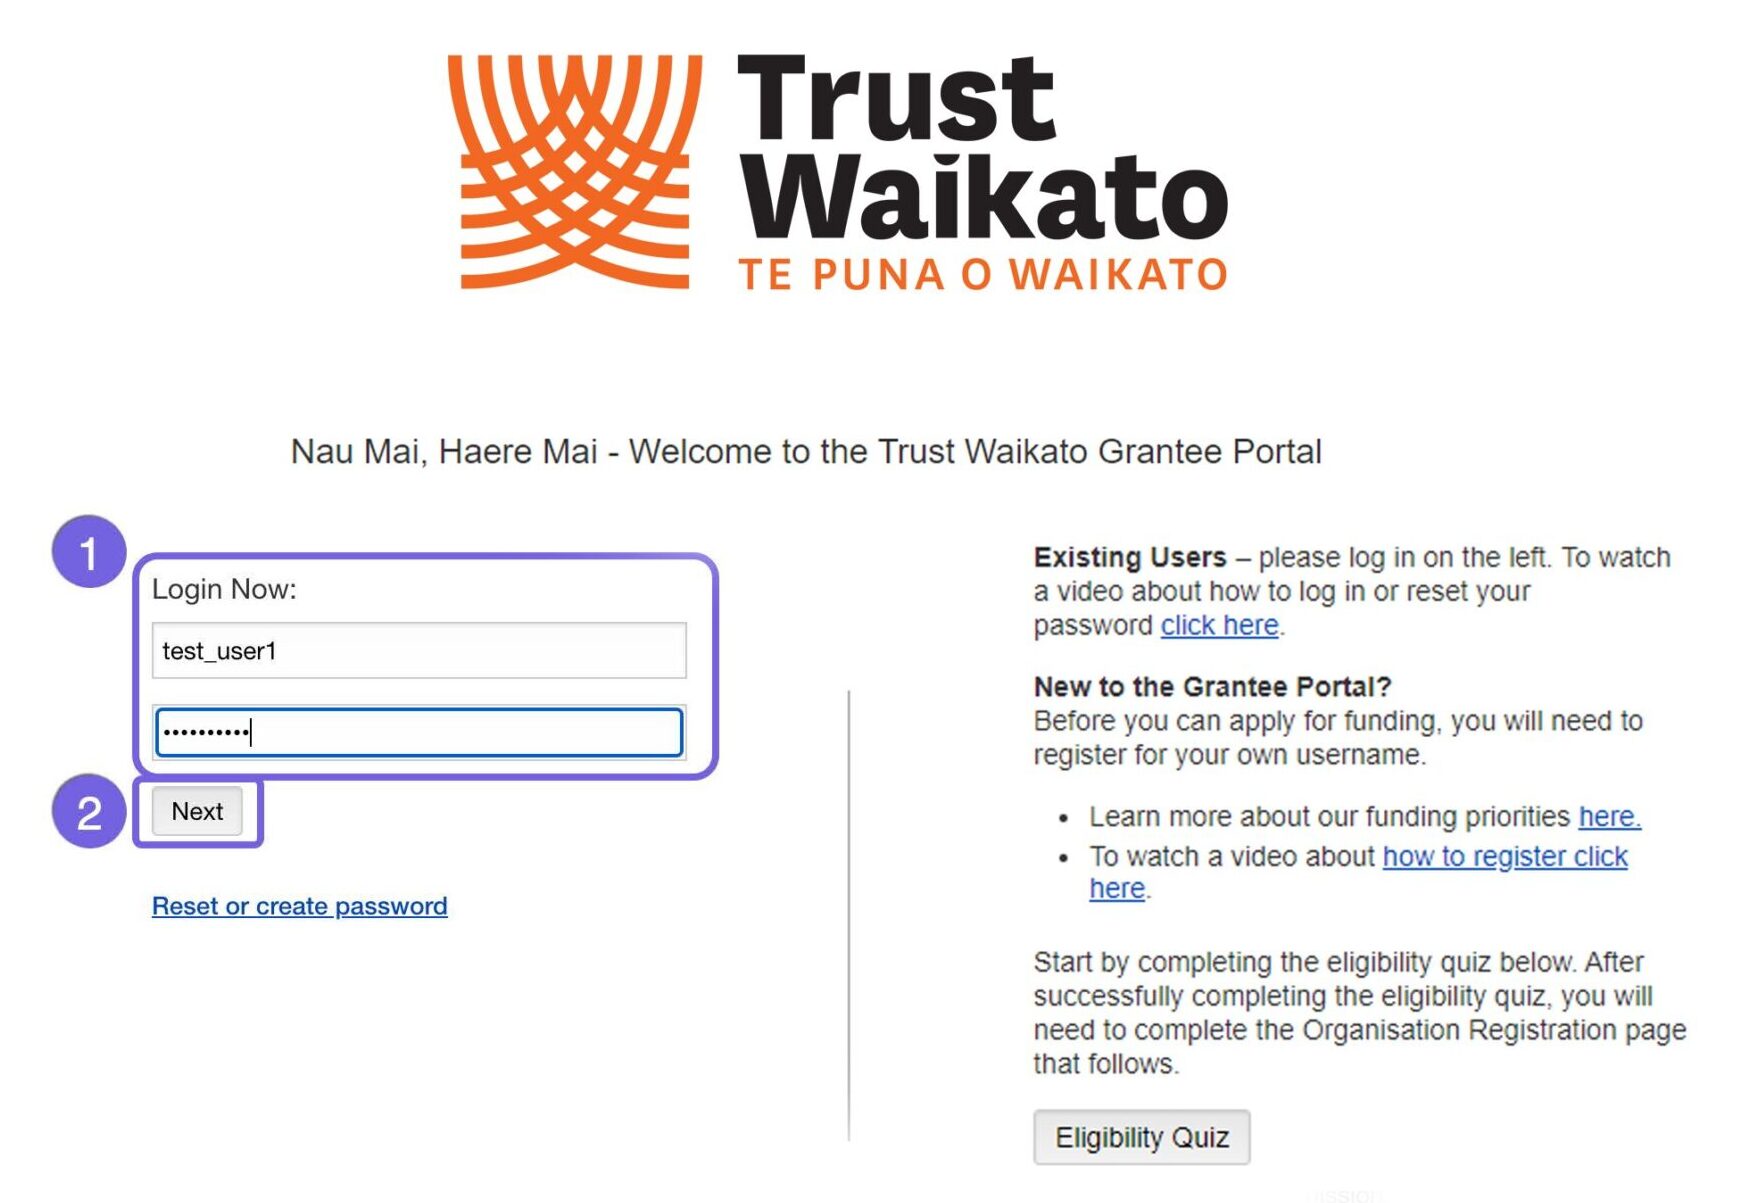 Trust Waikato grantee portal login page indicating where to enter username and password details to proceed.